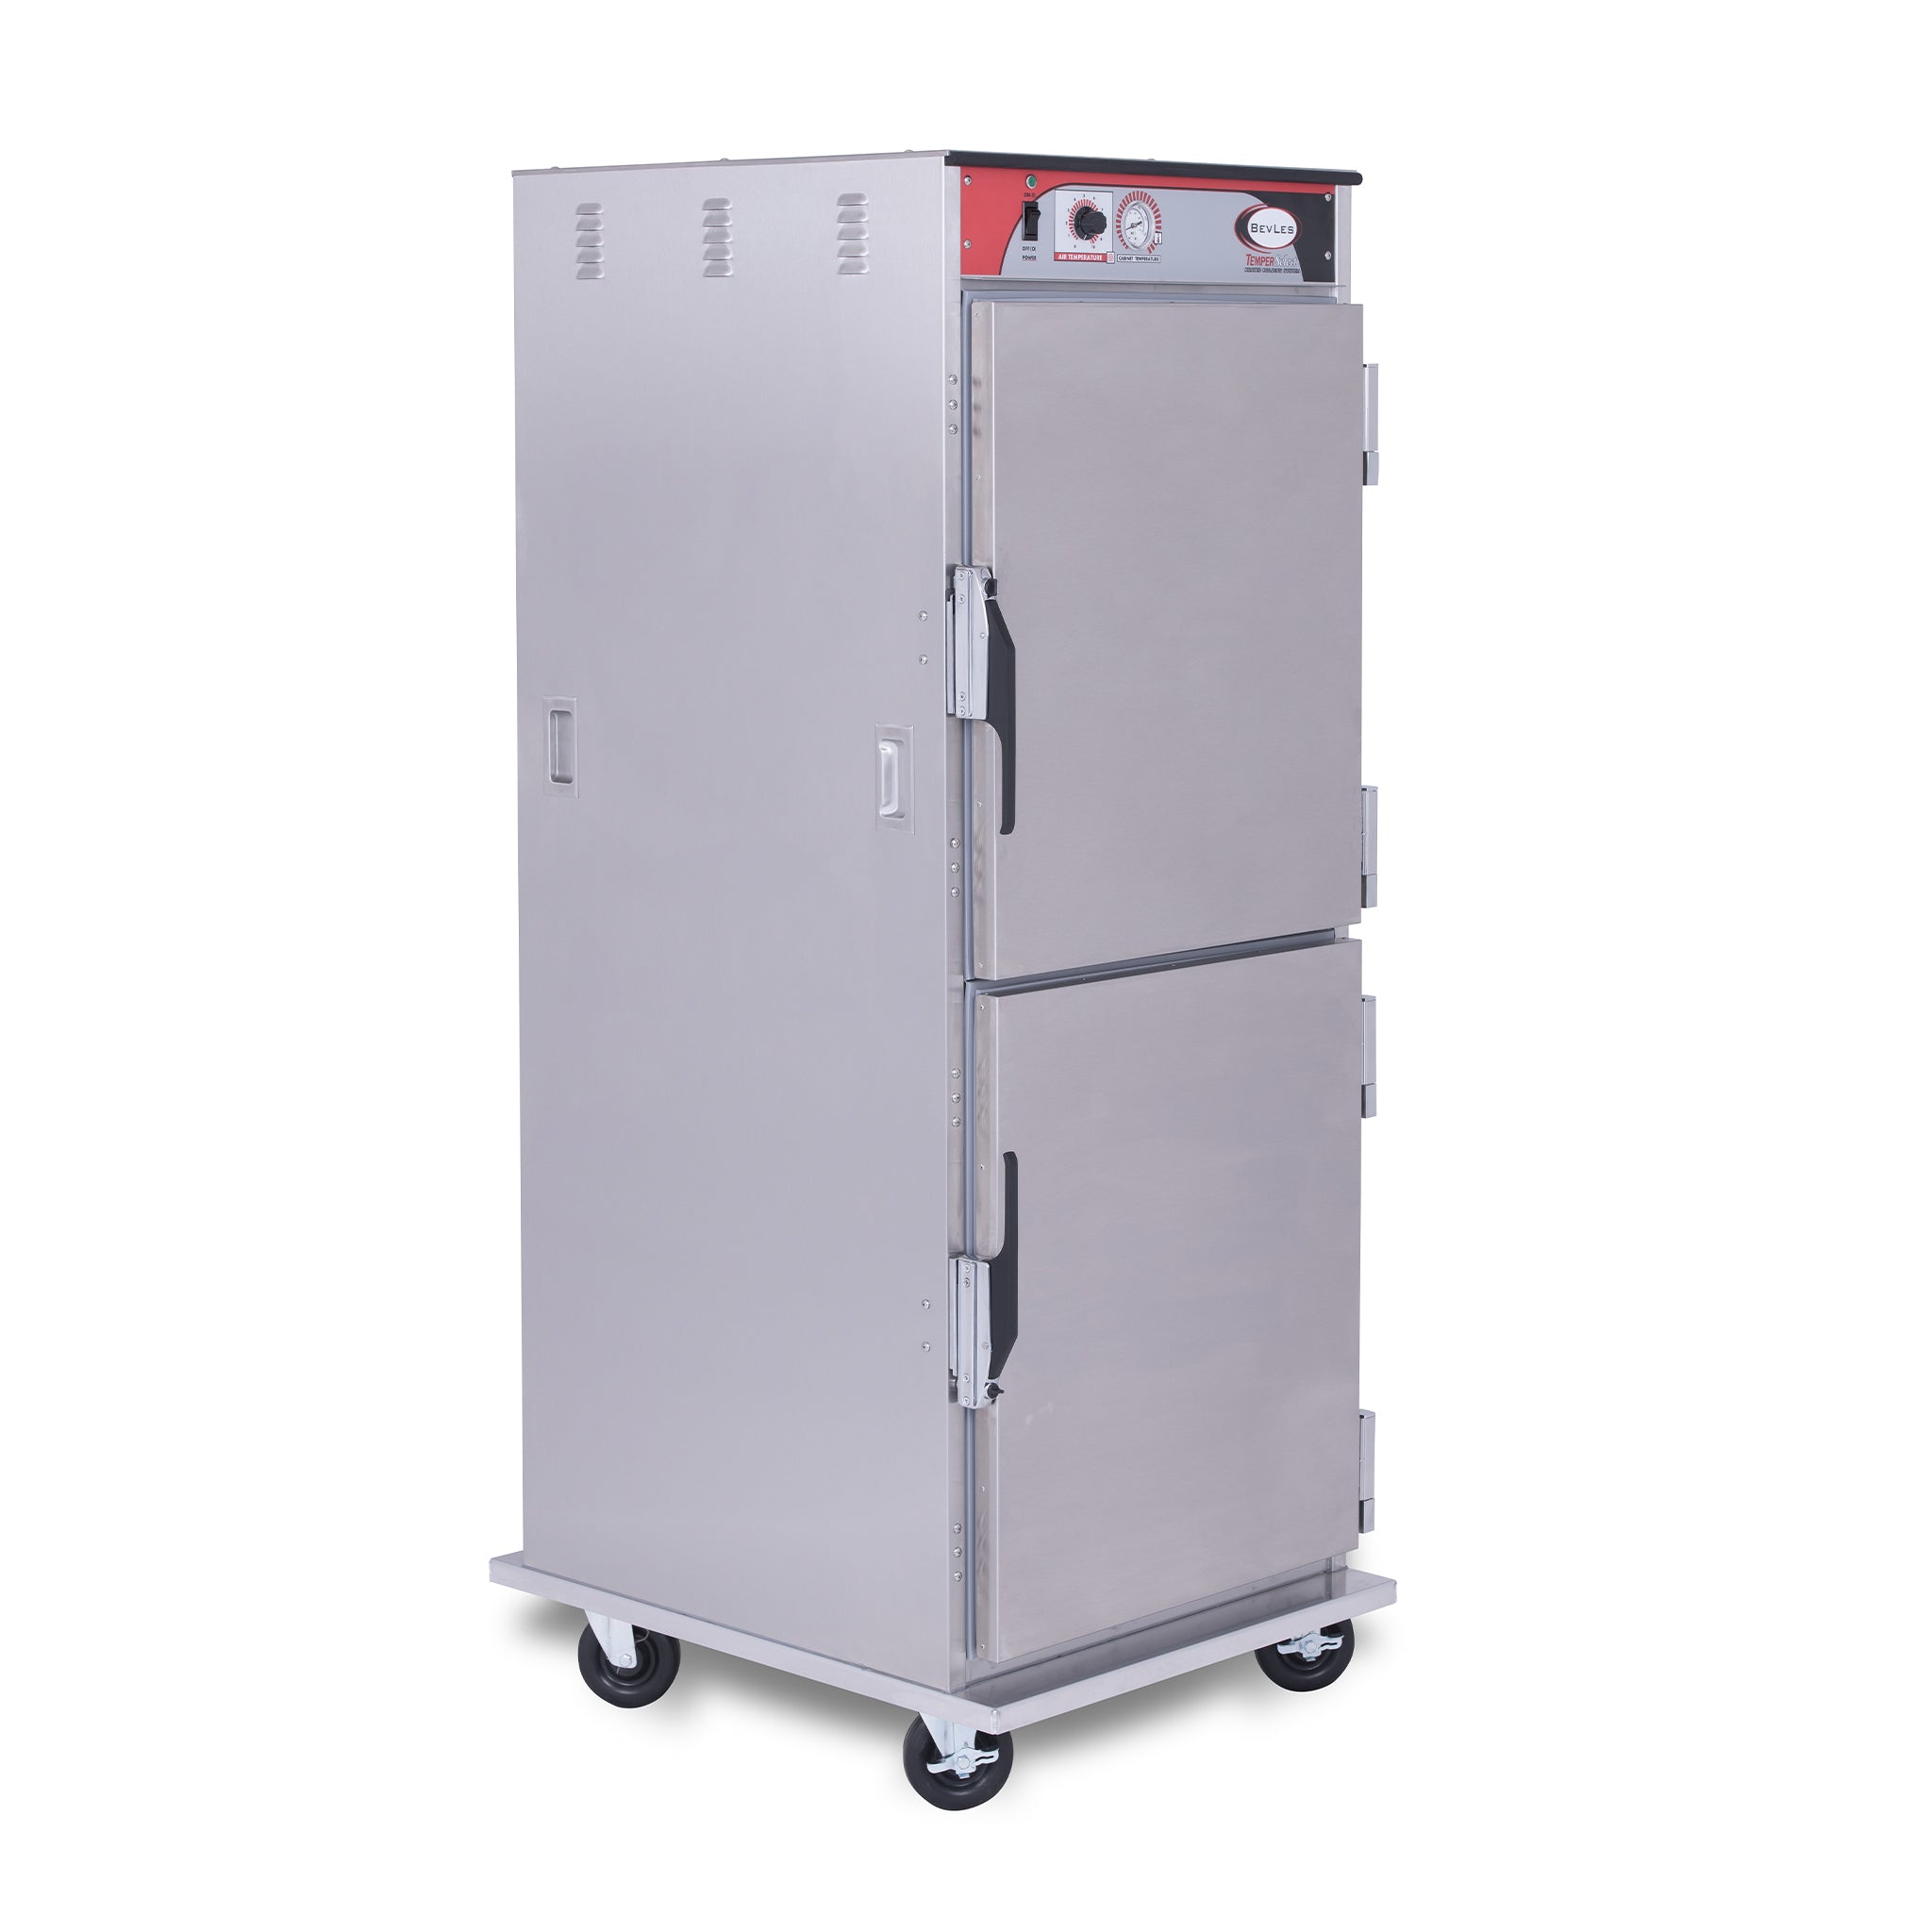 BevLes - HTSS74P161, BevLes Temper Select Full Size Heated Holding Cabinet, Narrow Width, 115V, in Silver